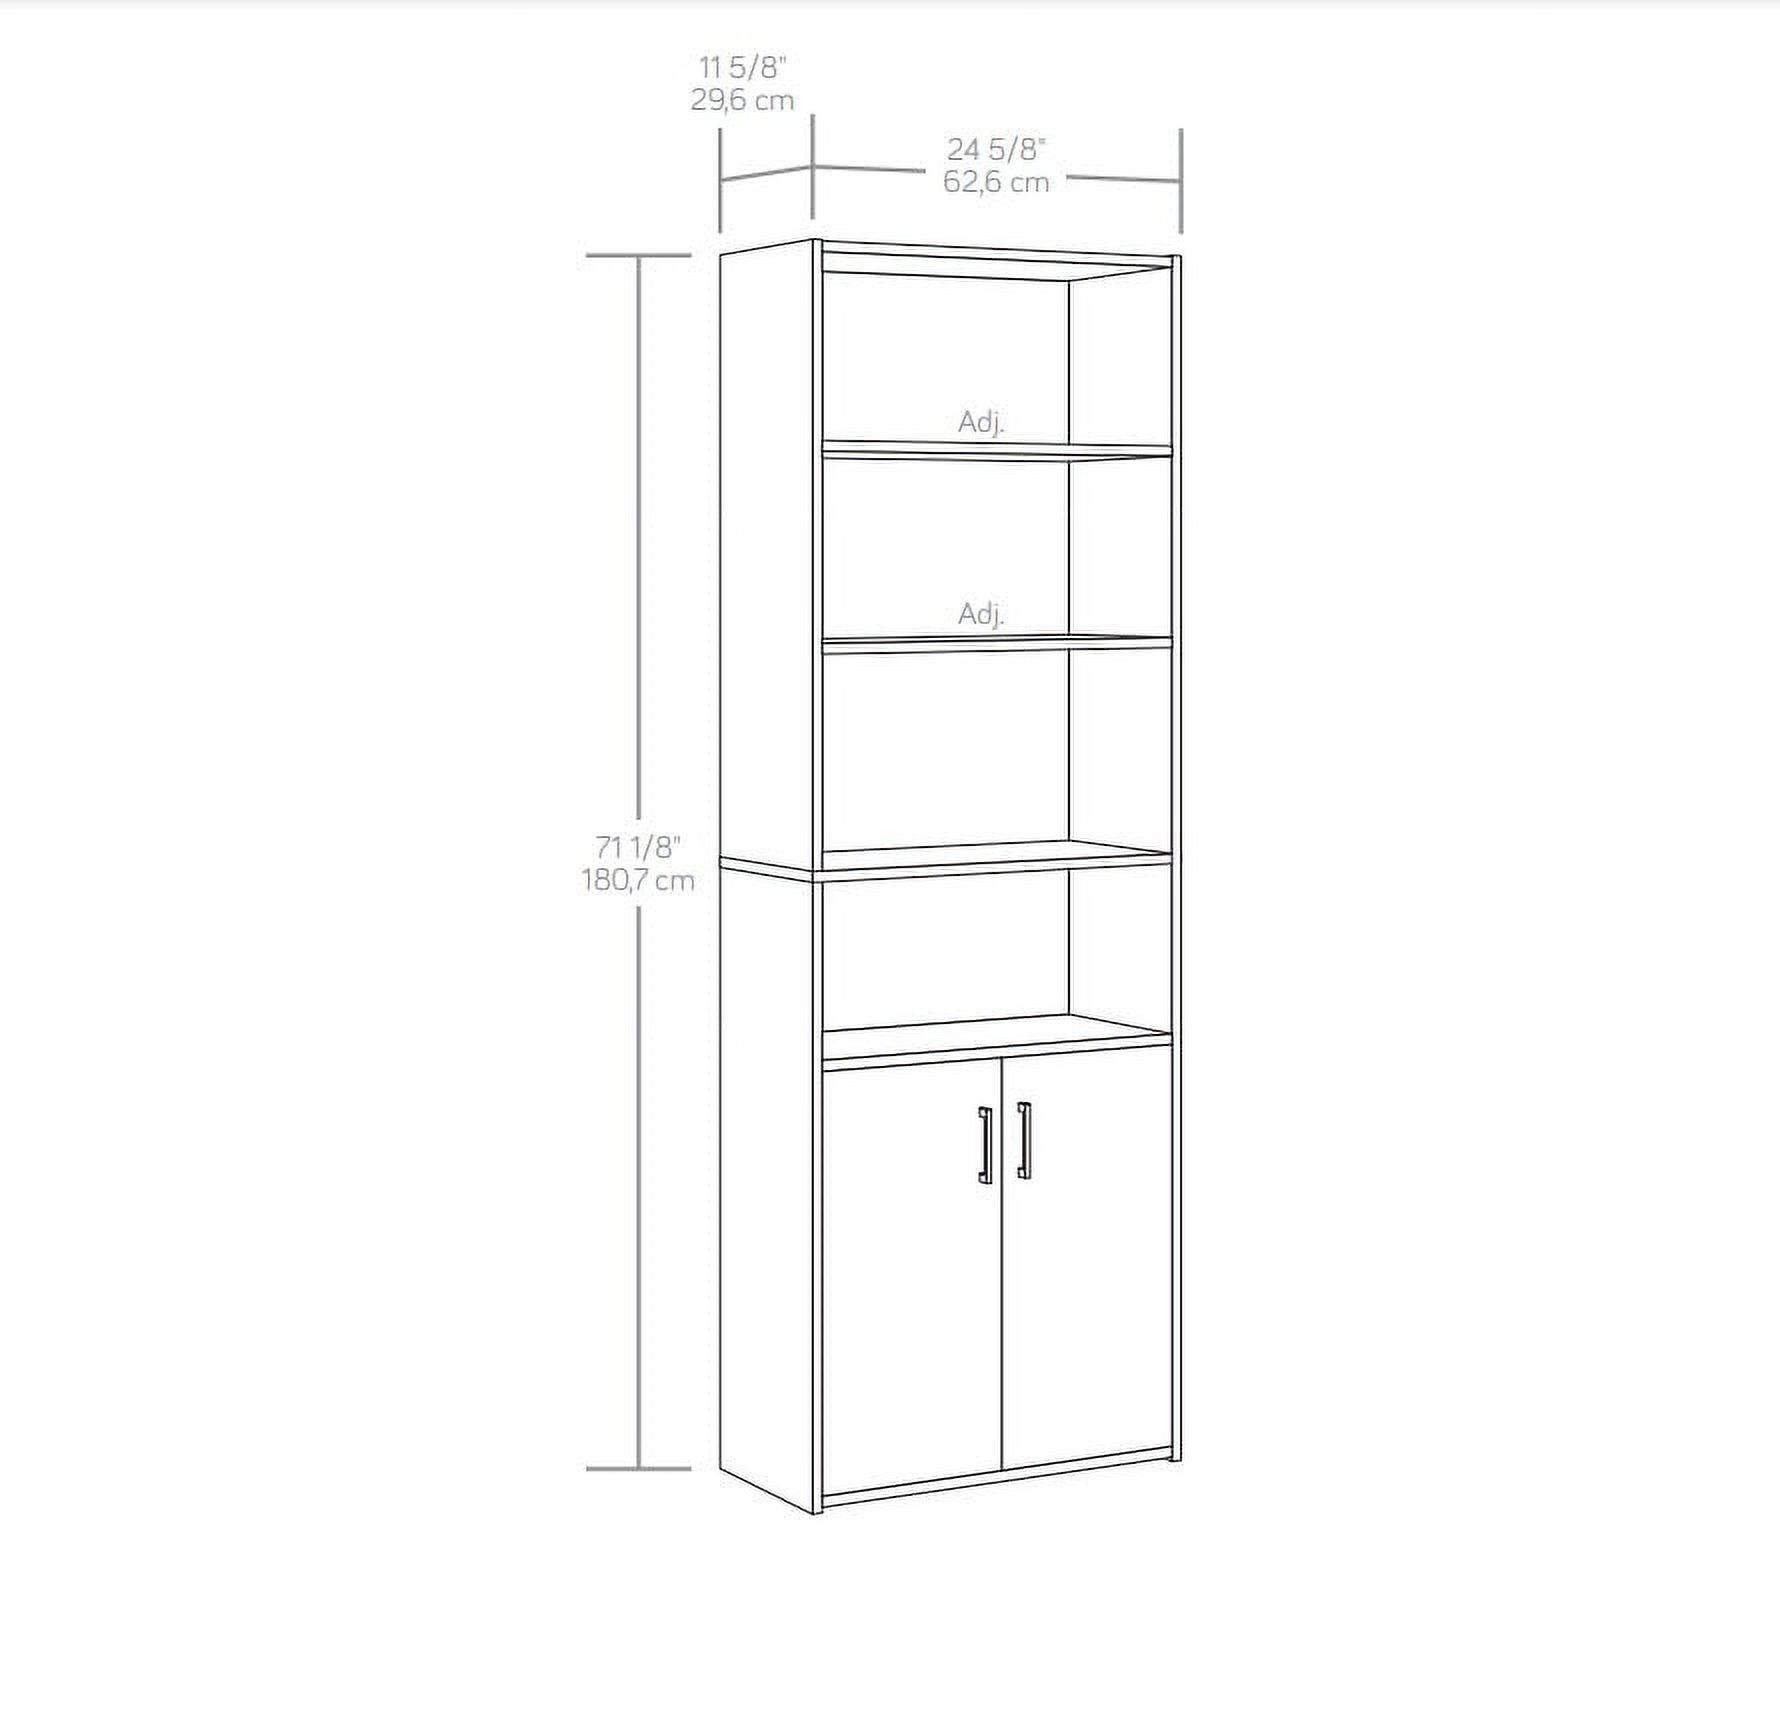 Mainstays Traditional 5 Shelf Bookcase with Doors, Soft White - image 5 of 5